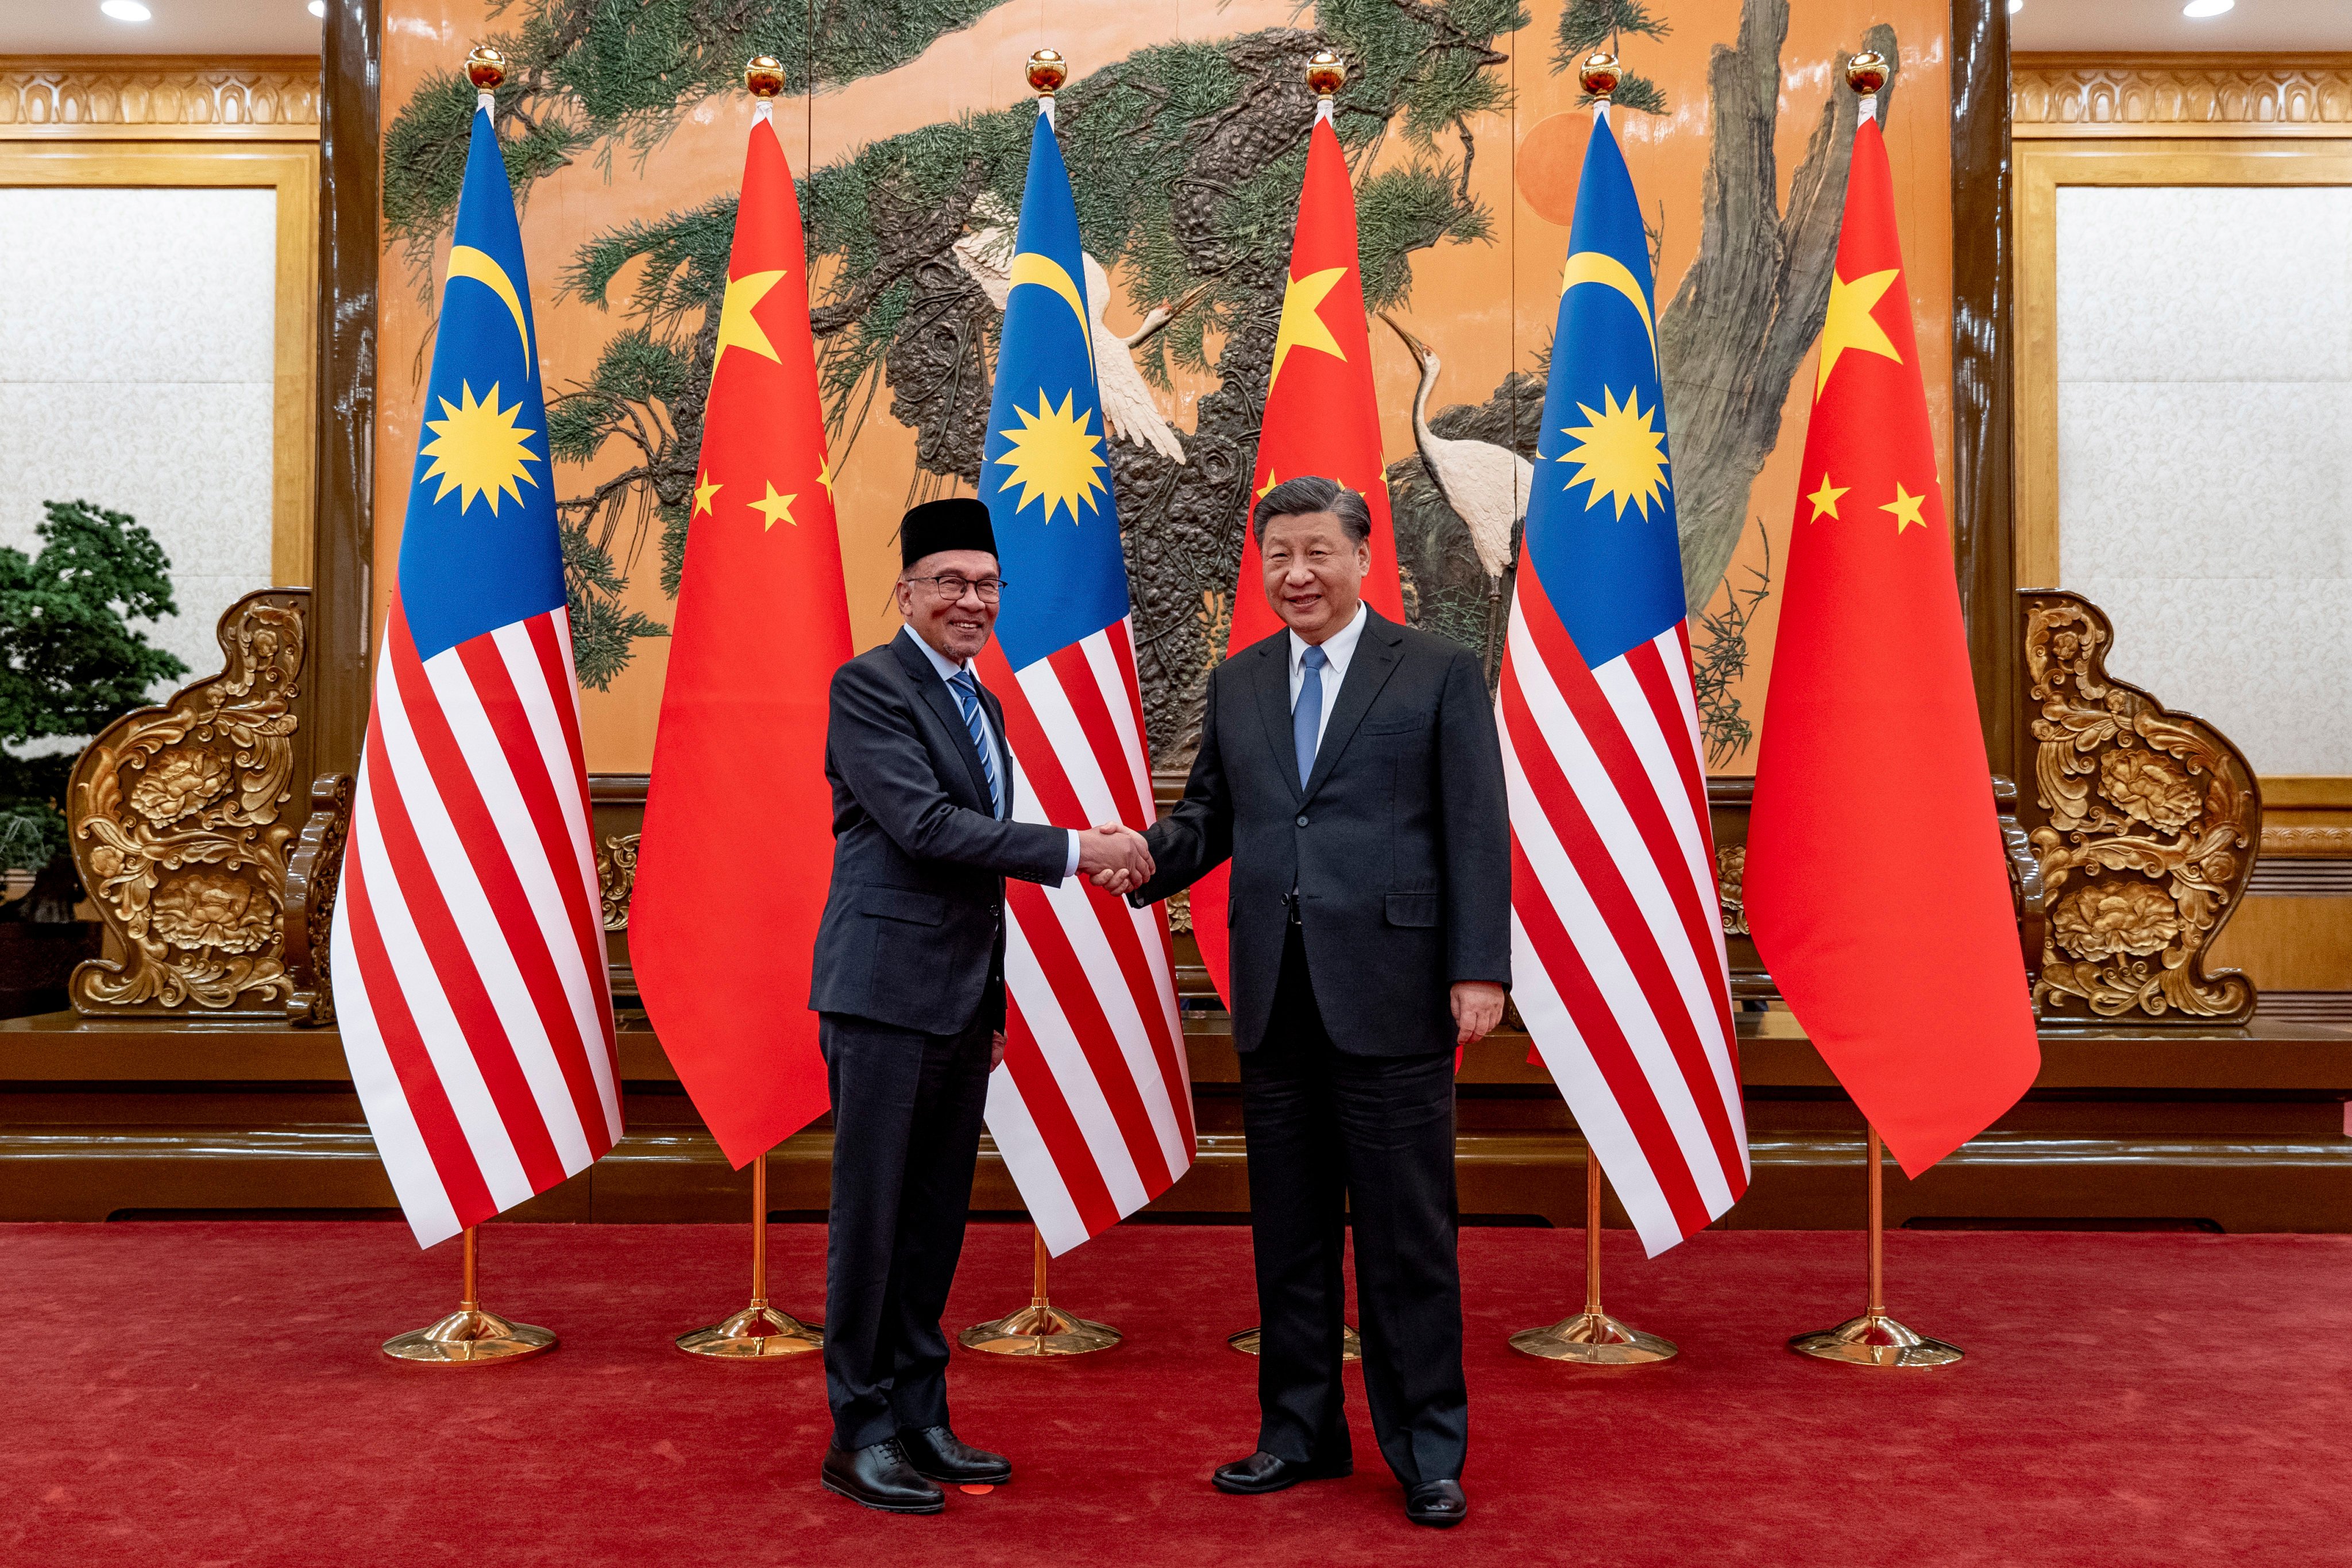 Malaysian Prime Minister Anwar Ibrahim (left) meets  Chinese President Xi Jinping at the Great Hall of the People in Beijing on Friday. Photo: Prime Minister’s Office of Malaysia via AP